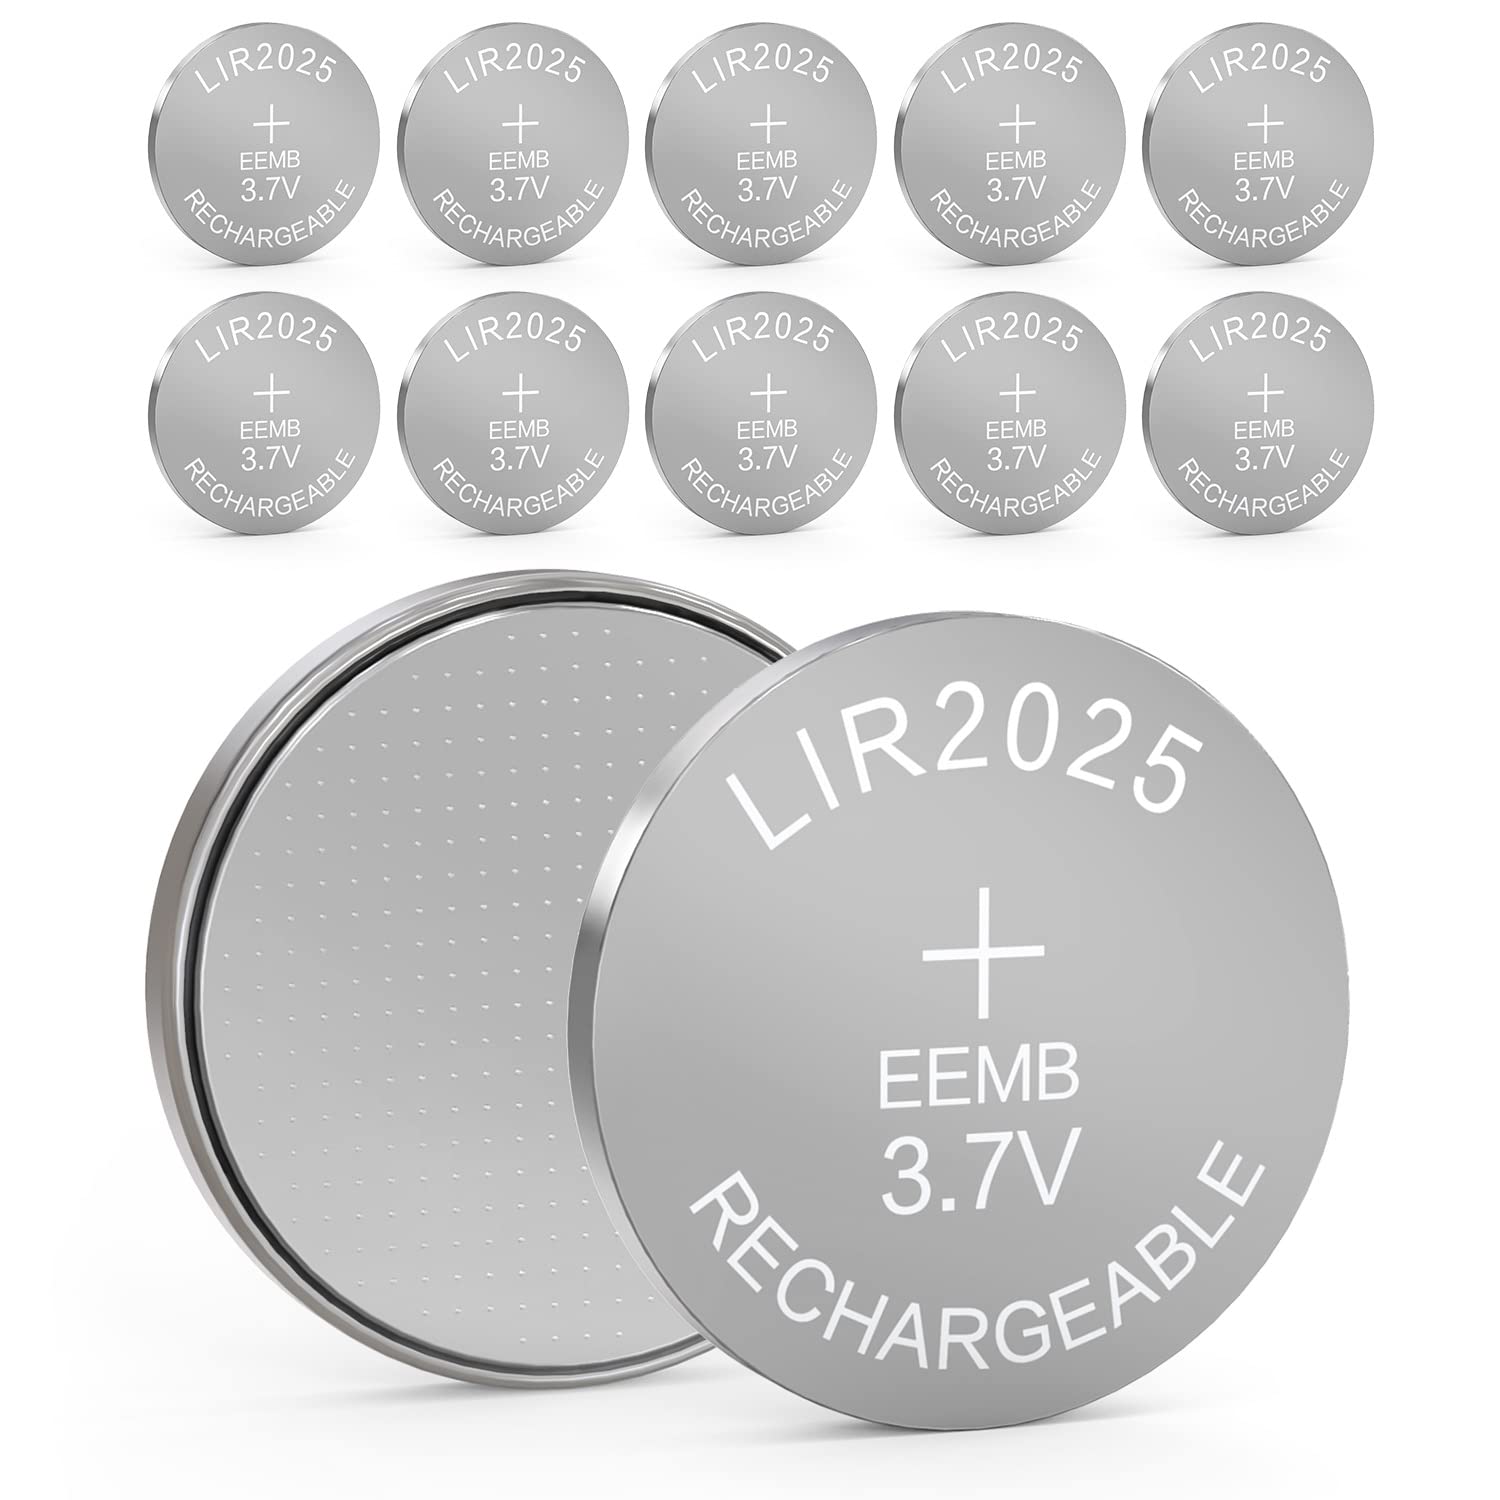 10PCS EEMB LIR2025 Rechargeable Battery 3.7V Lithium-ion Coin Button Cell Batteries 40mAh